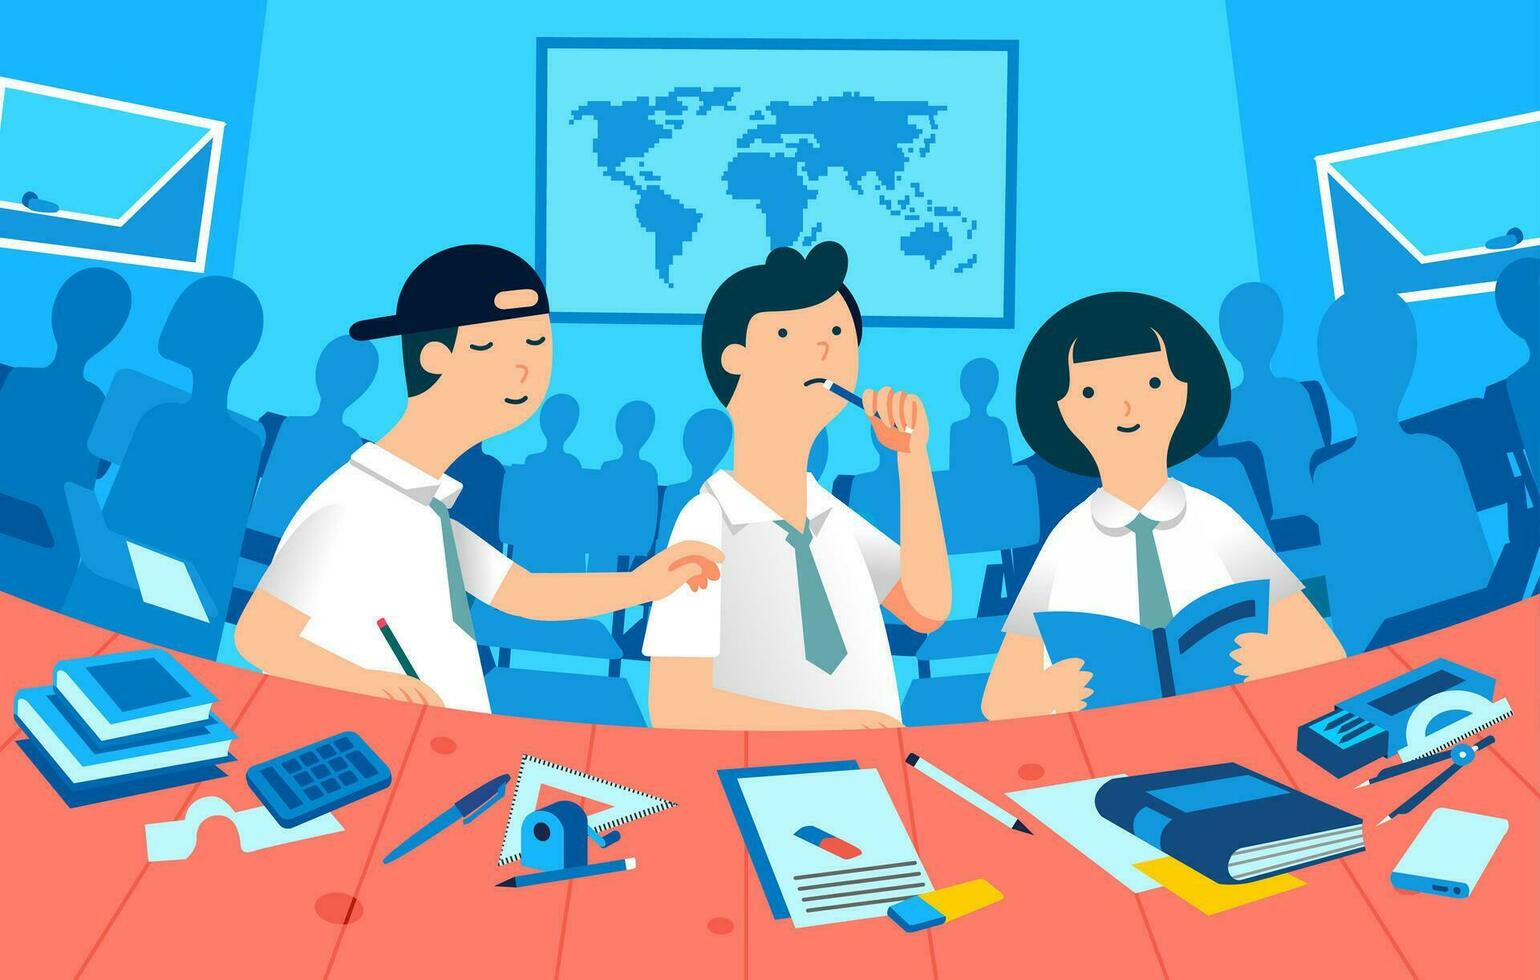 student study in a classroom, three character boys and girl and many classmates silhouette as background vector illustration